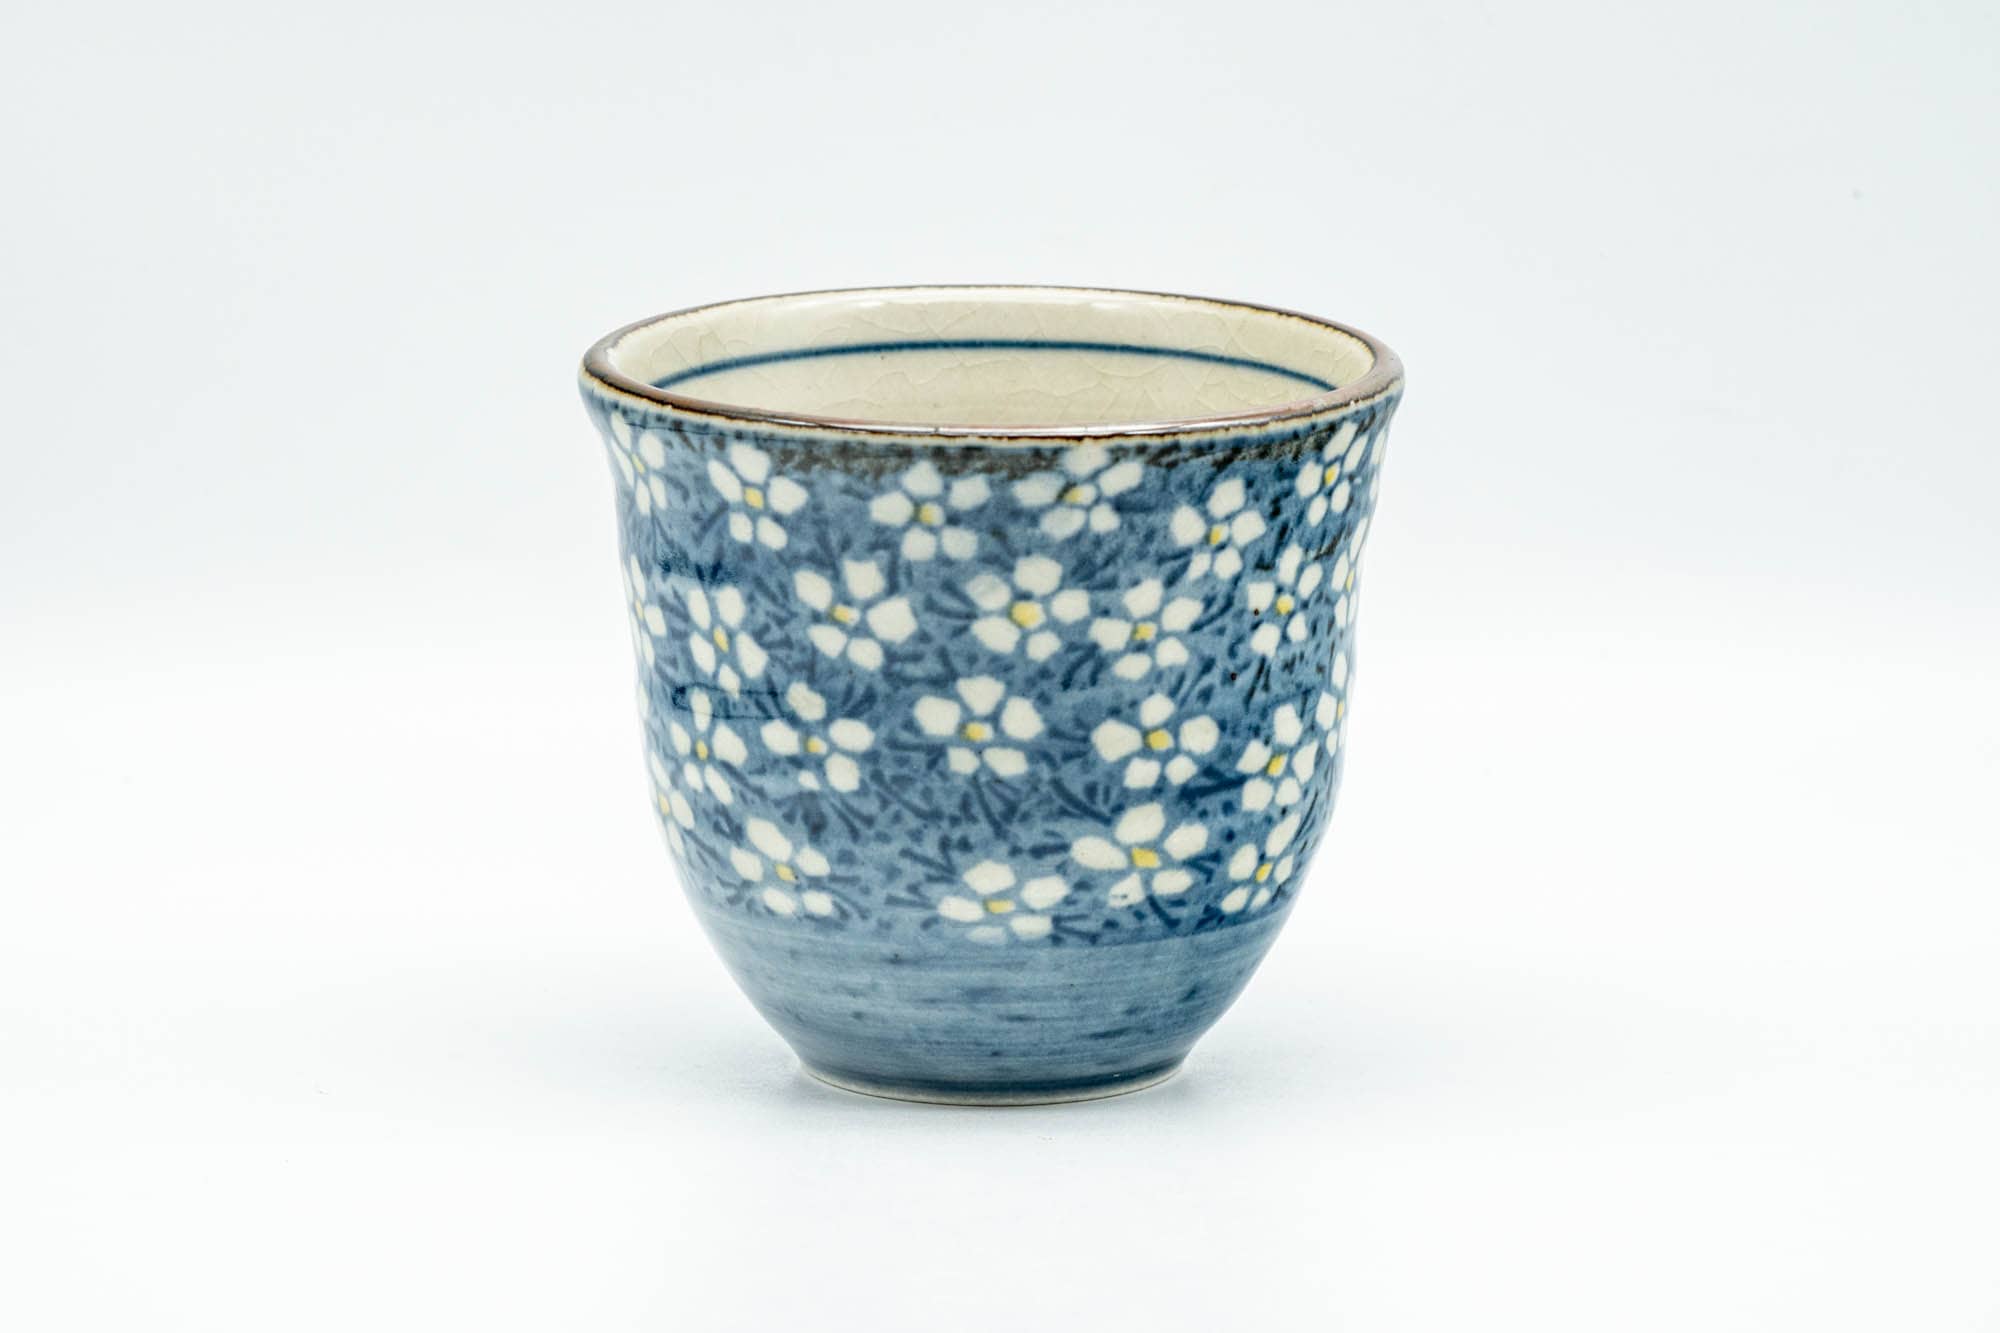 Japanese Teacup - Blue and White Floral Patterned Yunomi - 175ml - Tezumi